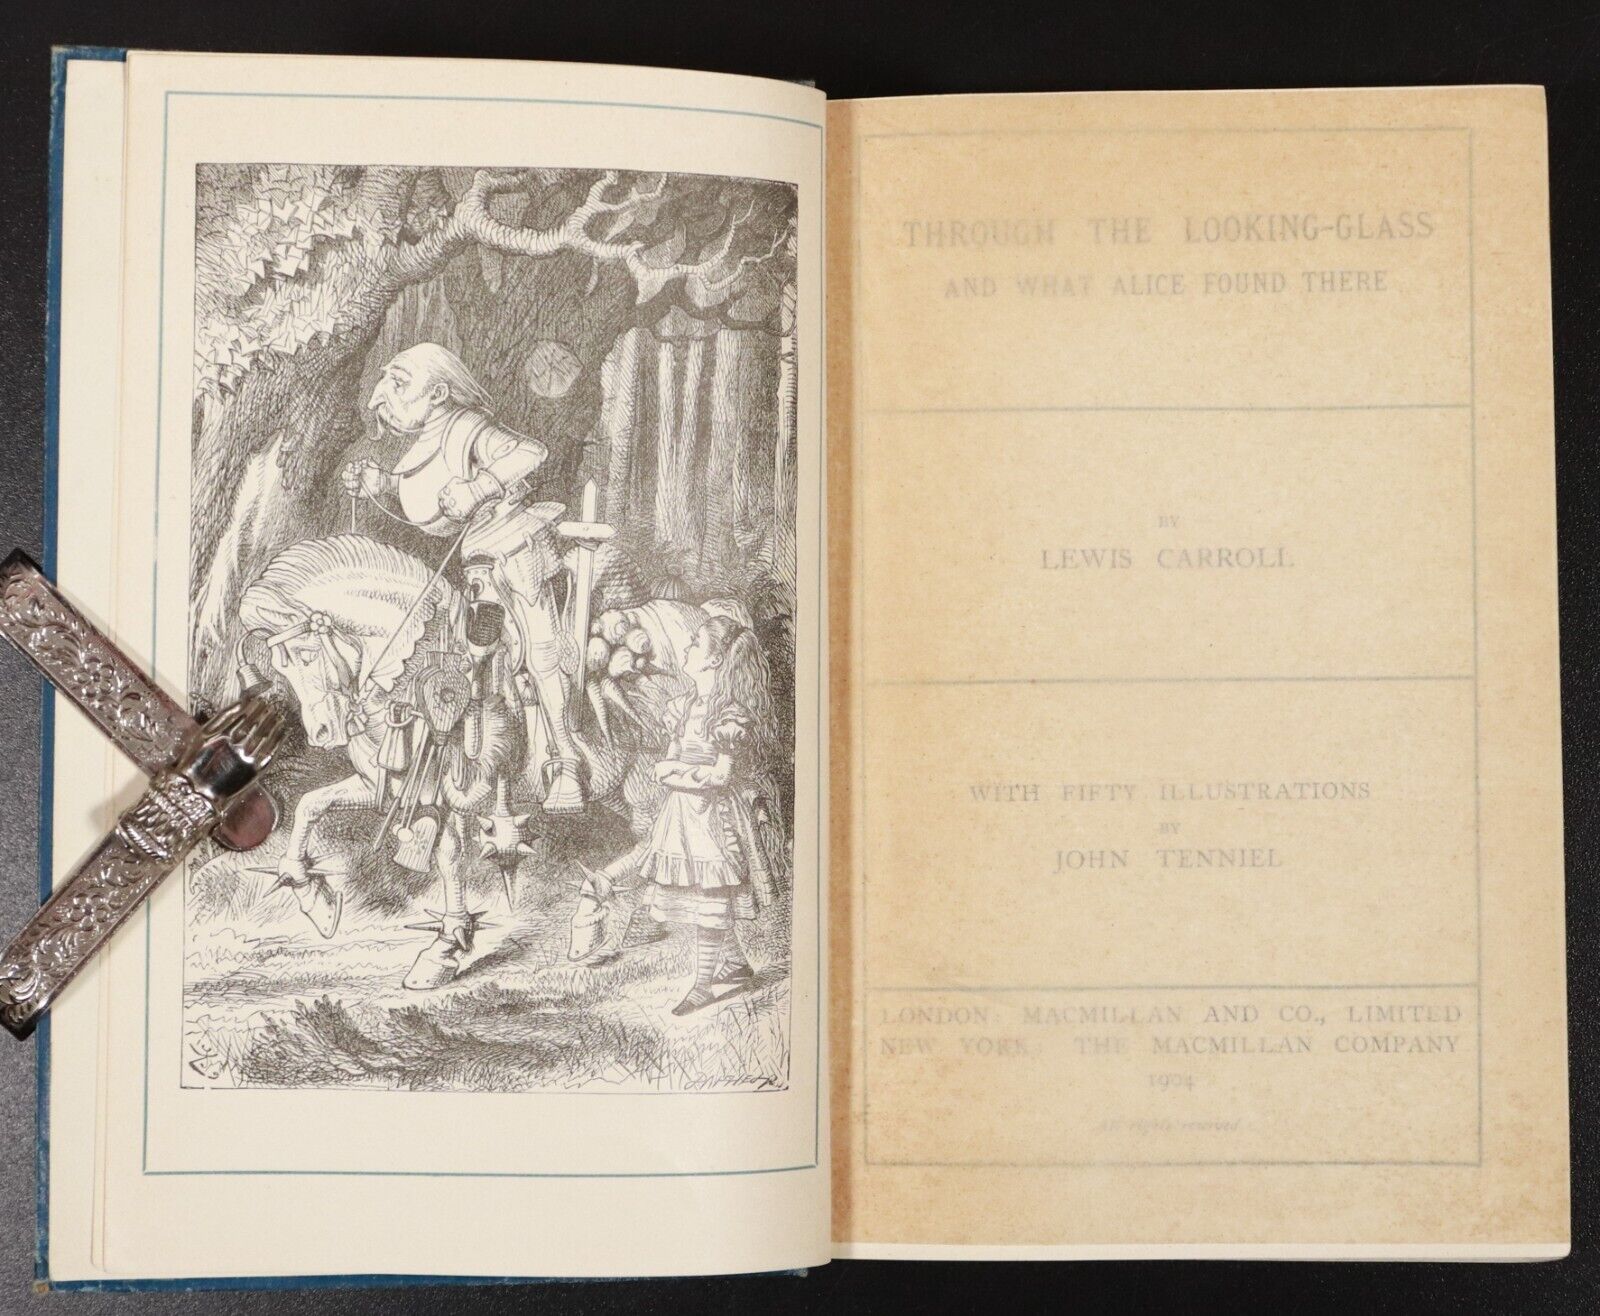 1904 Through The Looking-Glass by Lewis Carroll Antique Illustrated Fiction Book - 0